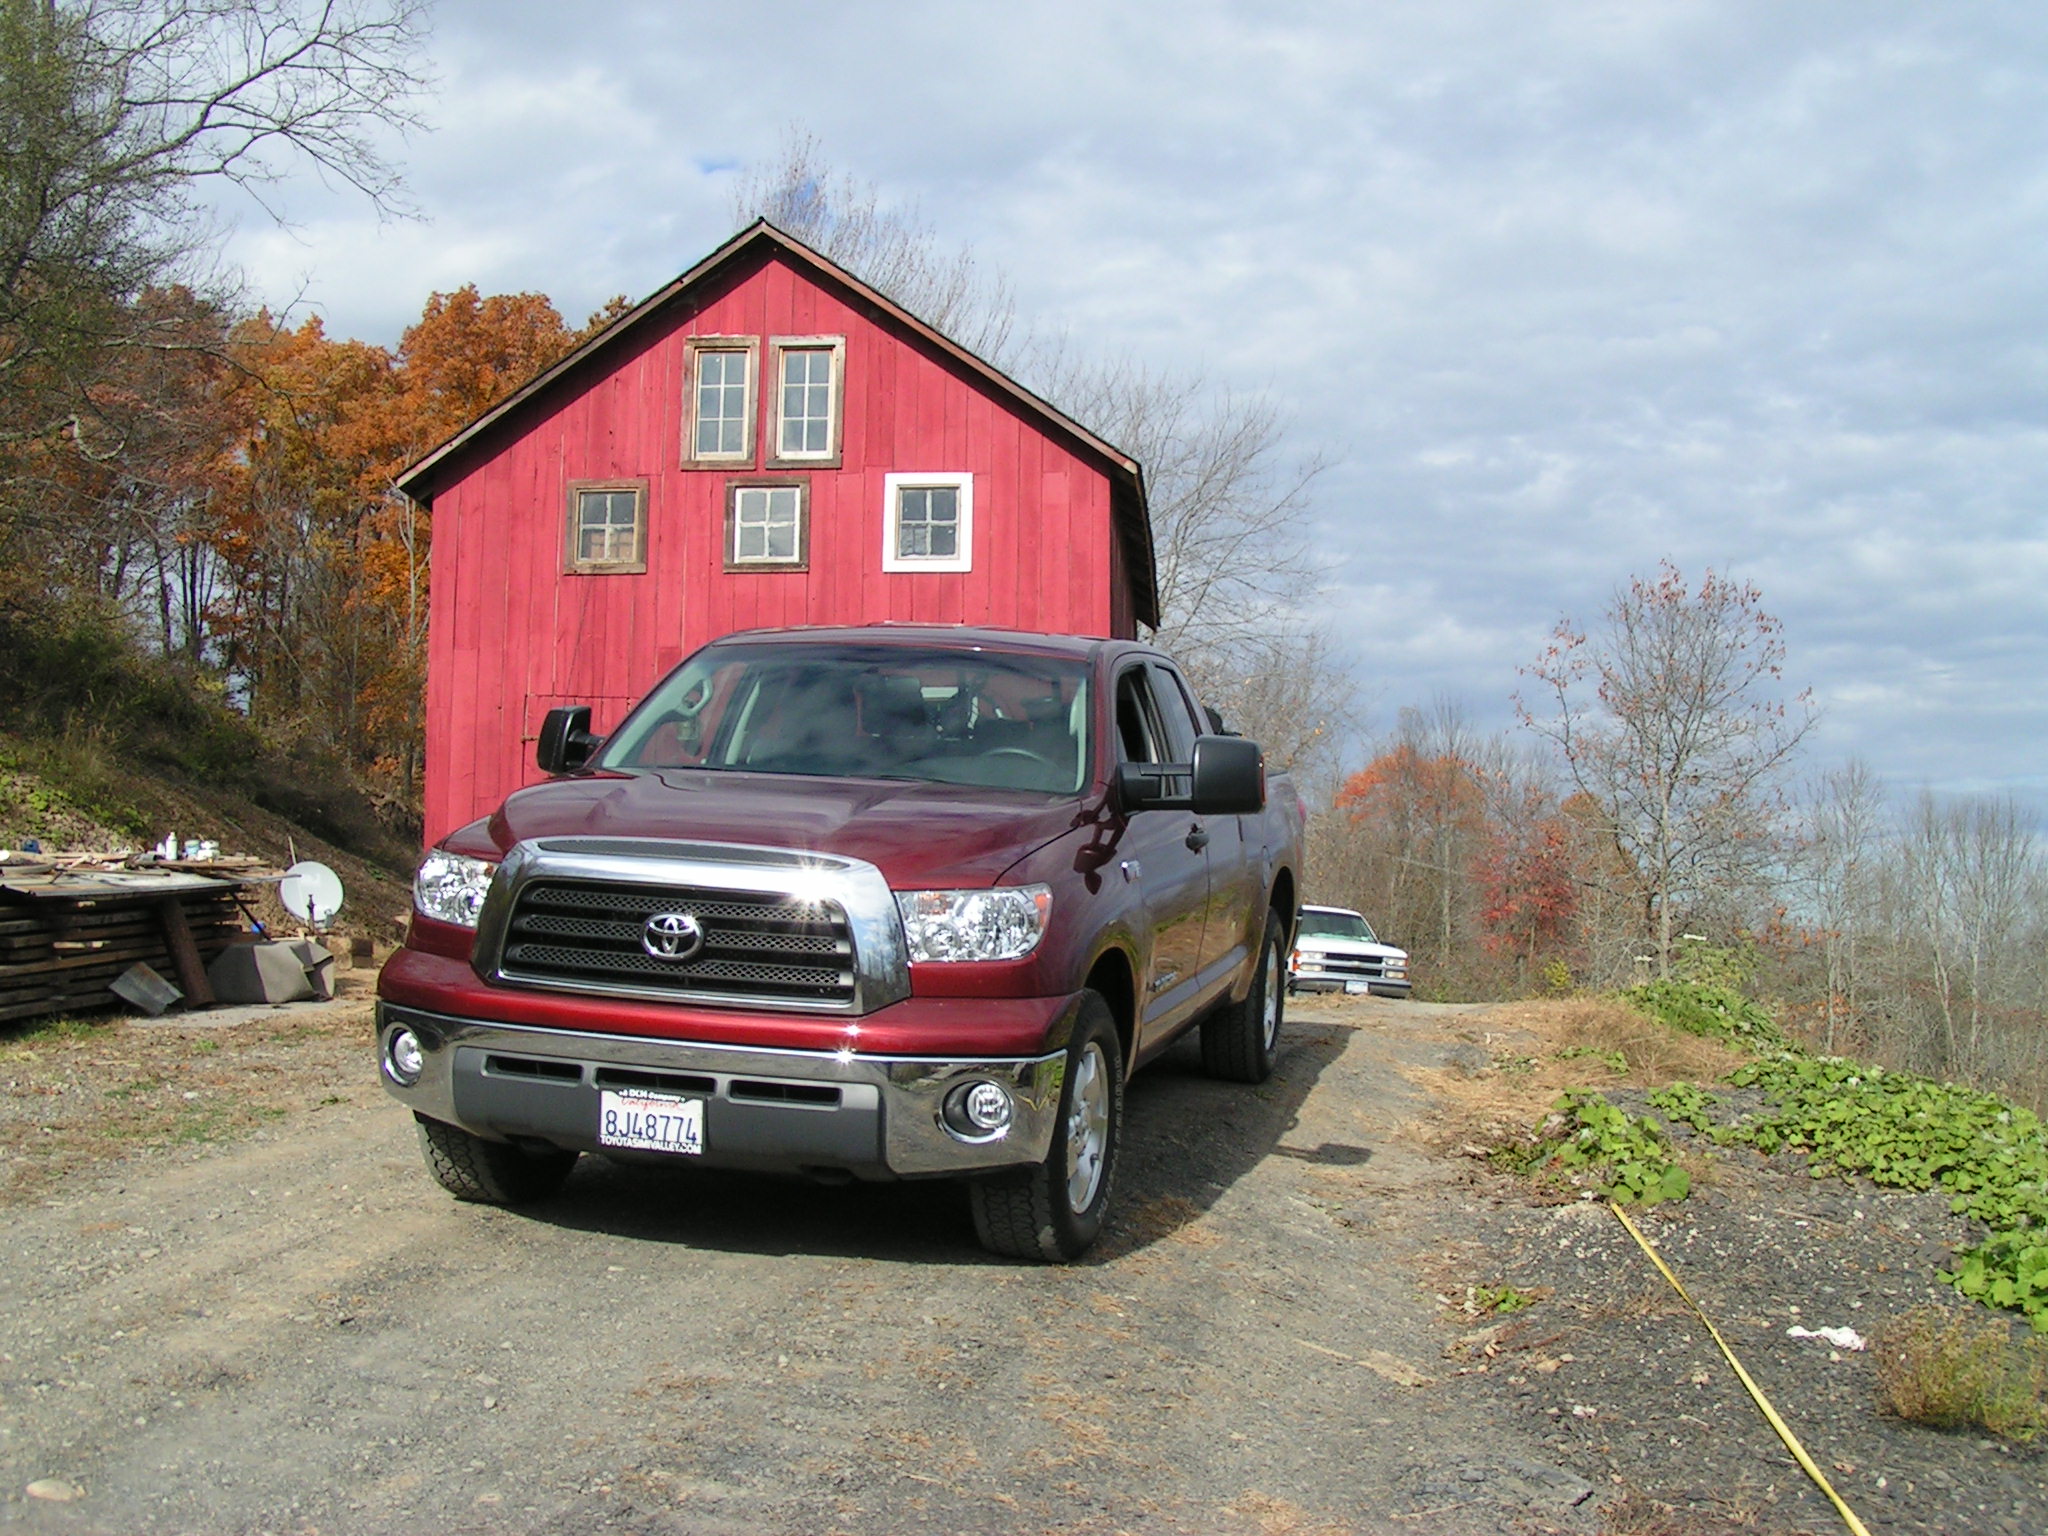 This 1760 barn sit on top of my hills over looking the hudson river vally in saratoga ny .